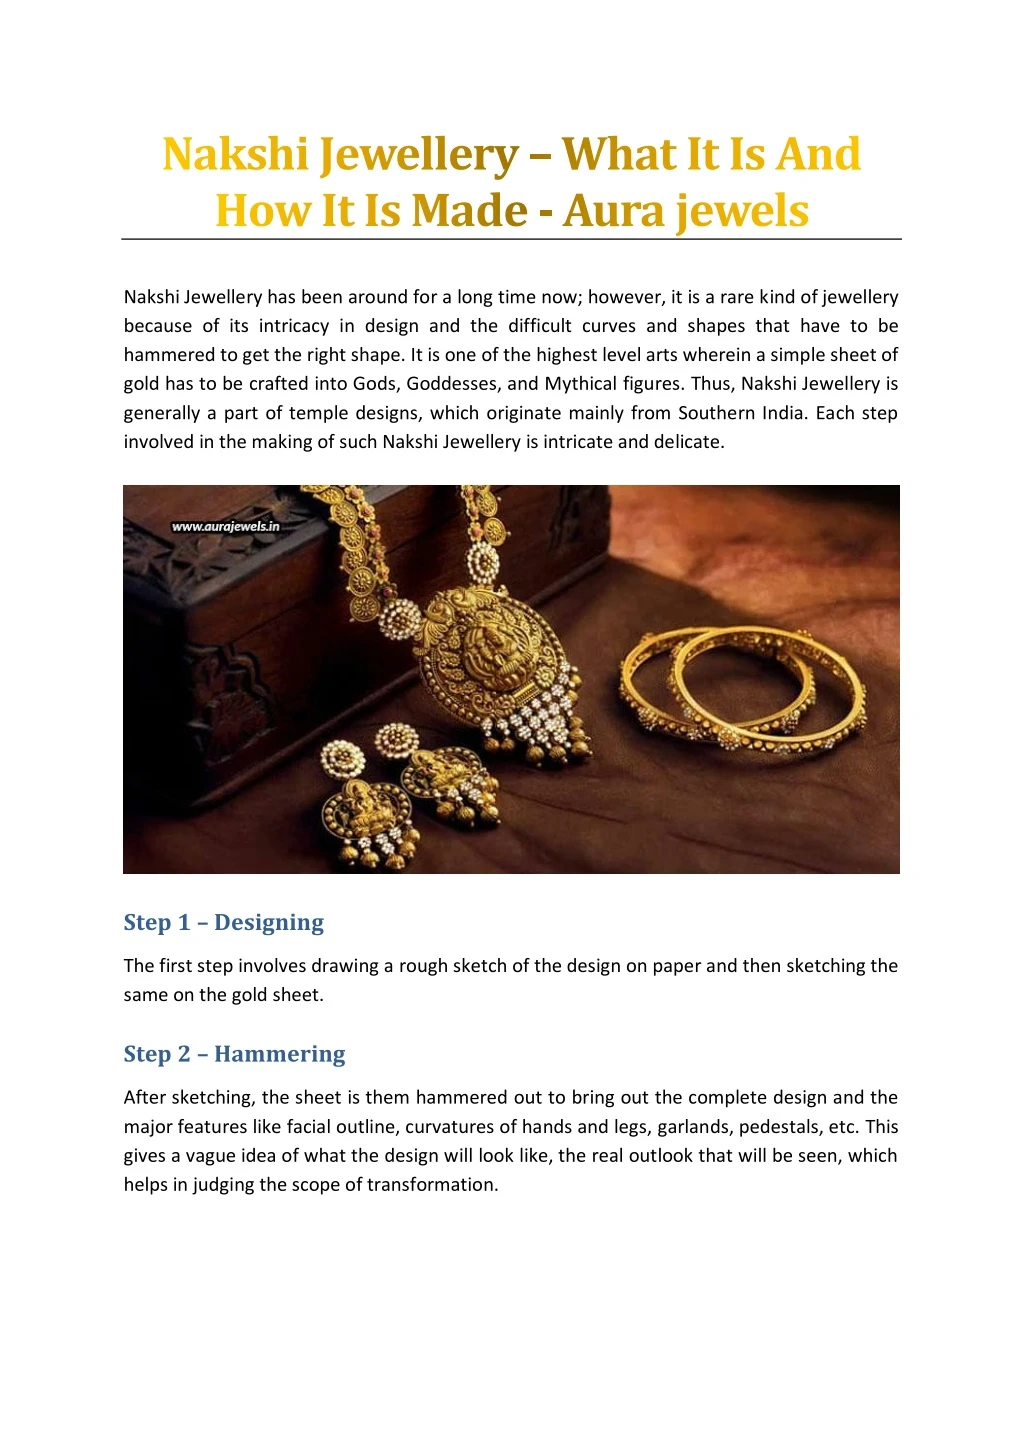 nakshi jewellery has been around for a long time